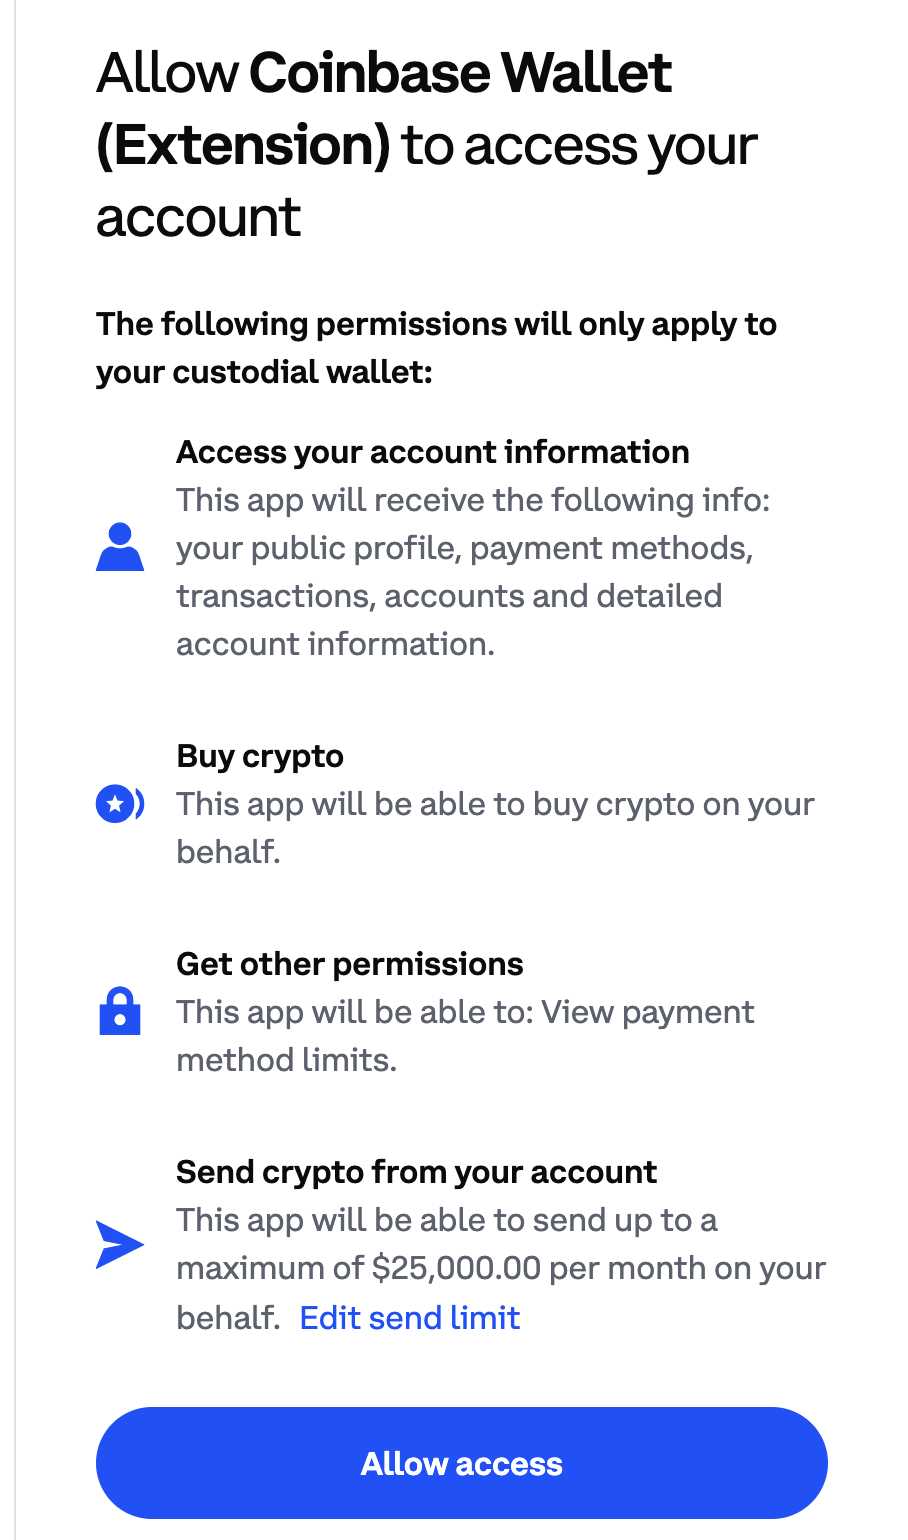 Step 3: Withdrawing Coins from Coinbase